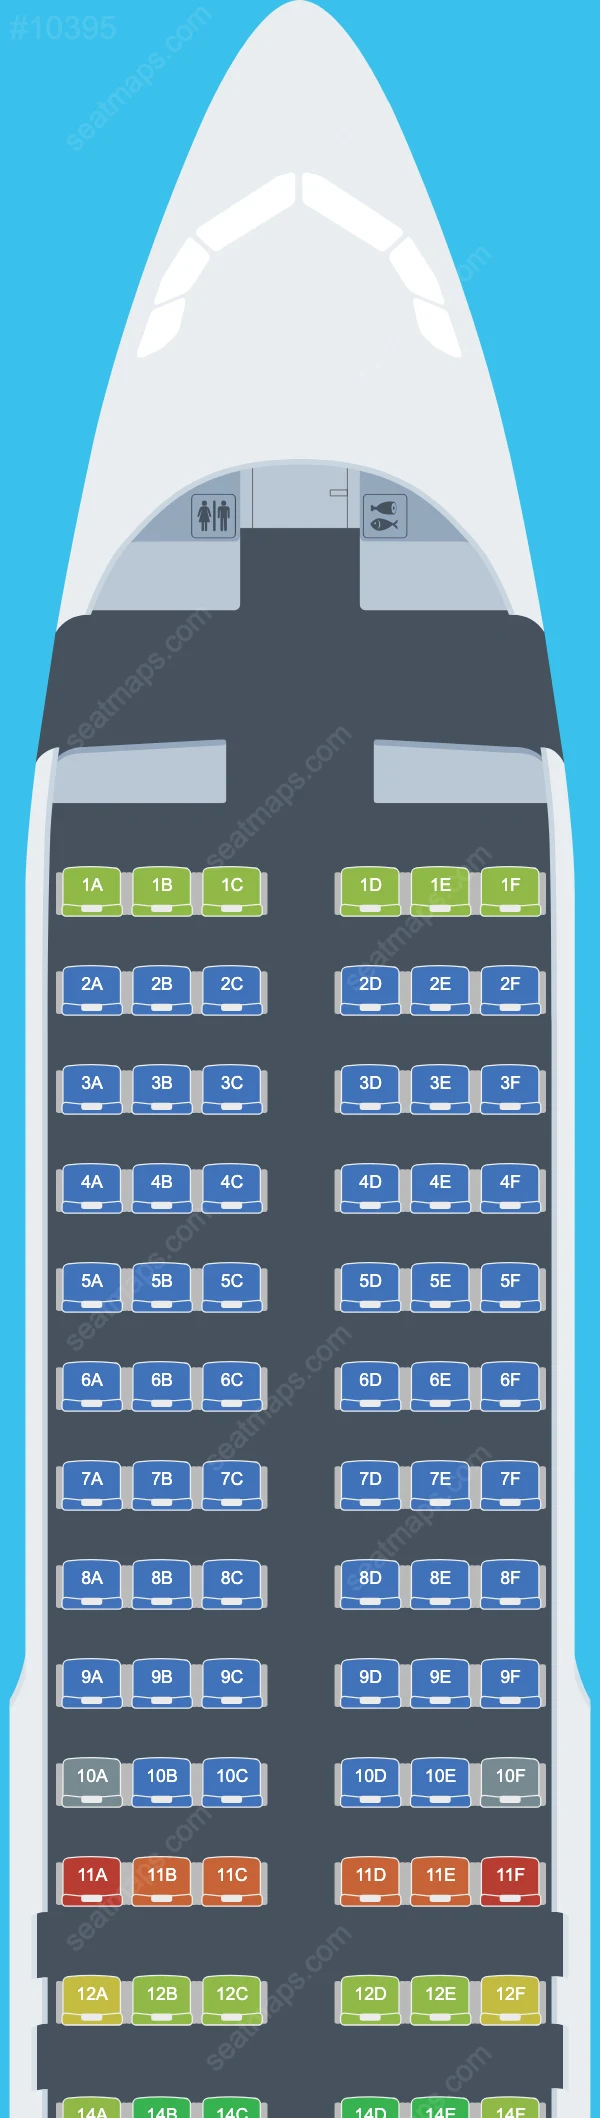 Royal Air Charter Service Airbus A320-200 seatmap preview